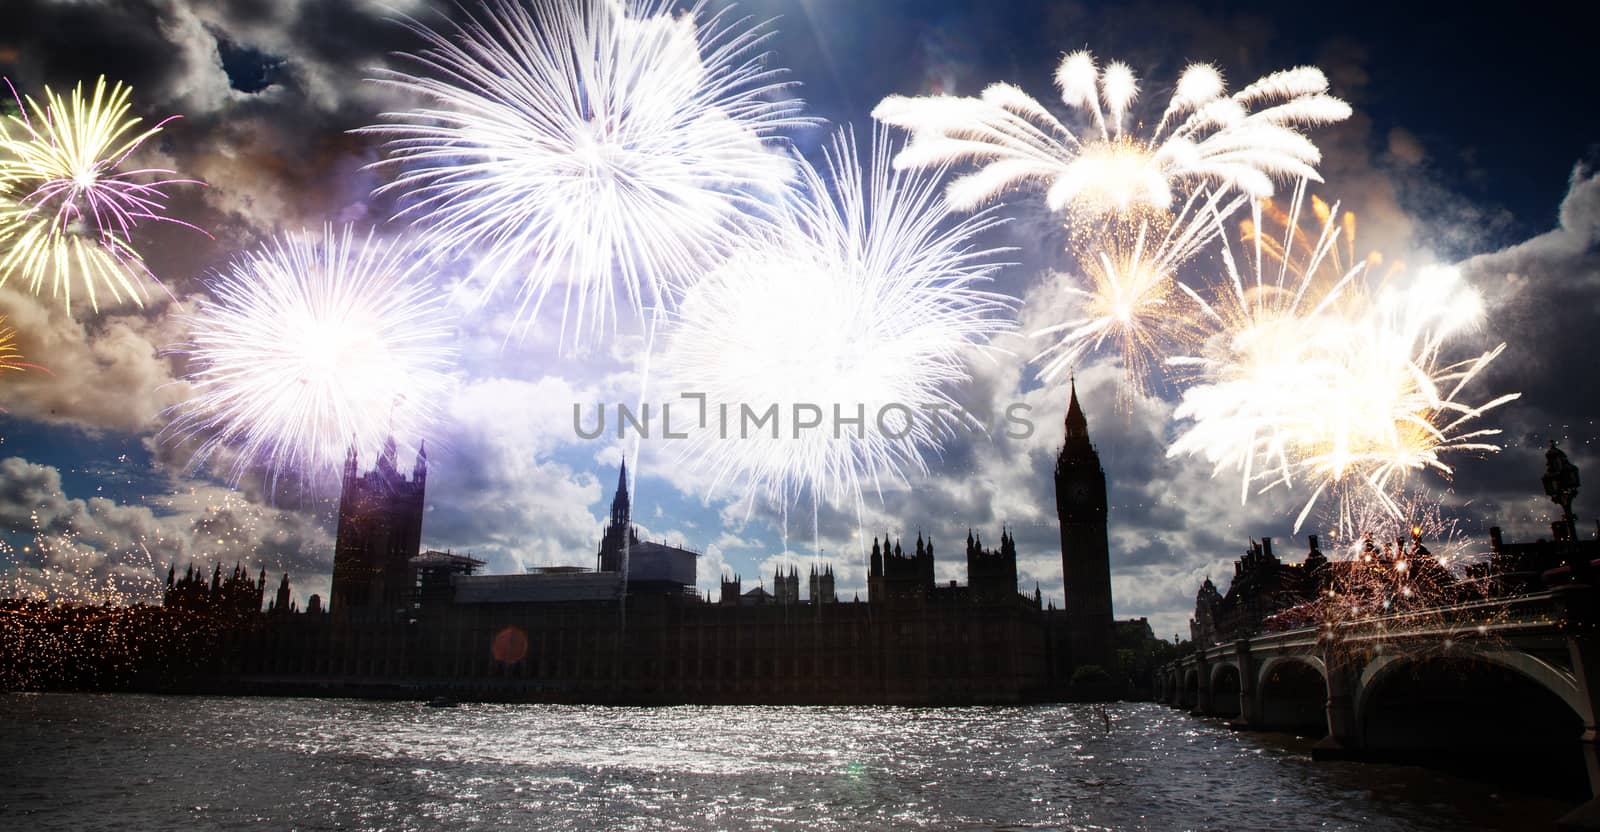  fireworks over Big Ben - new year celebrations in London, UK